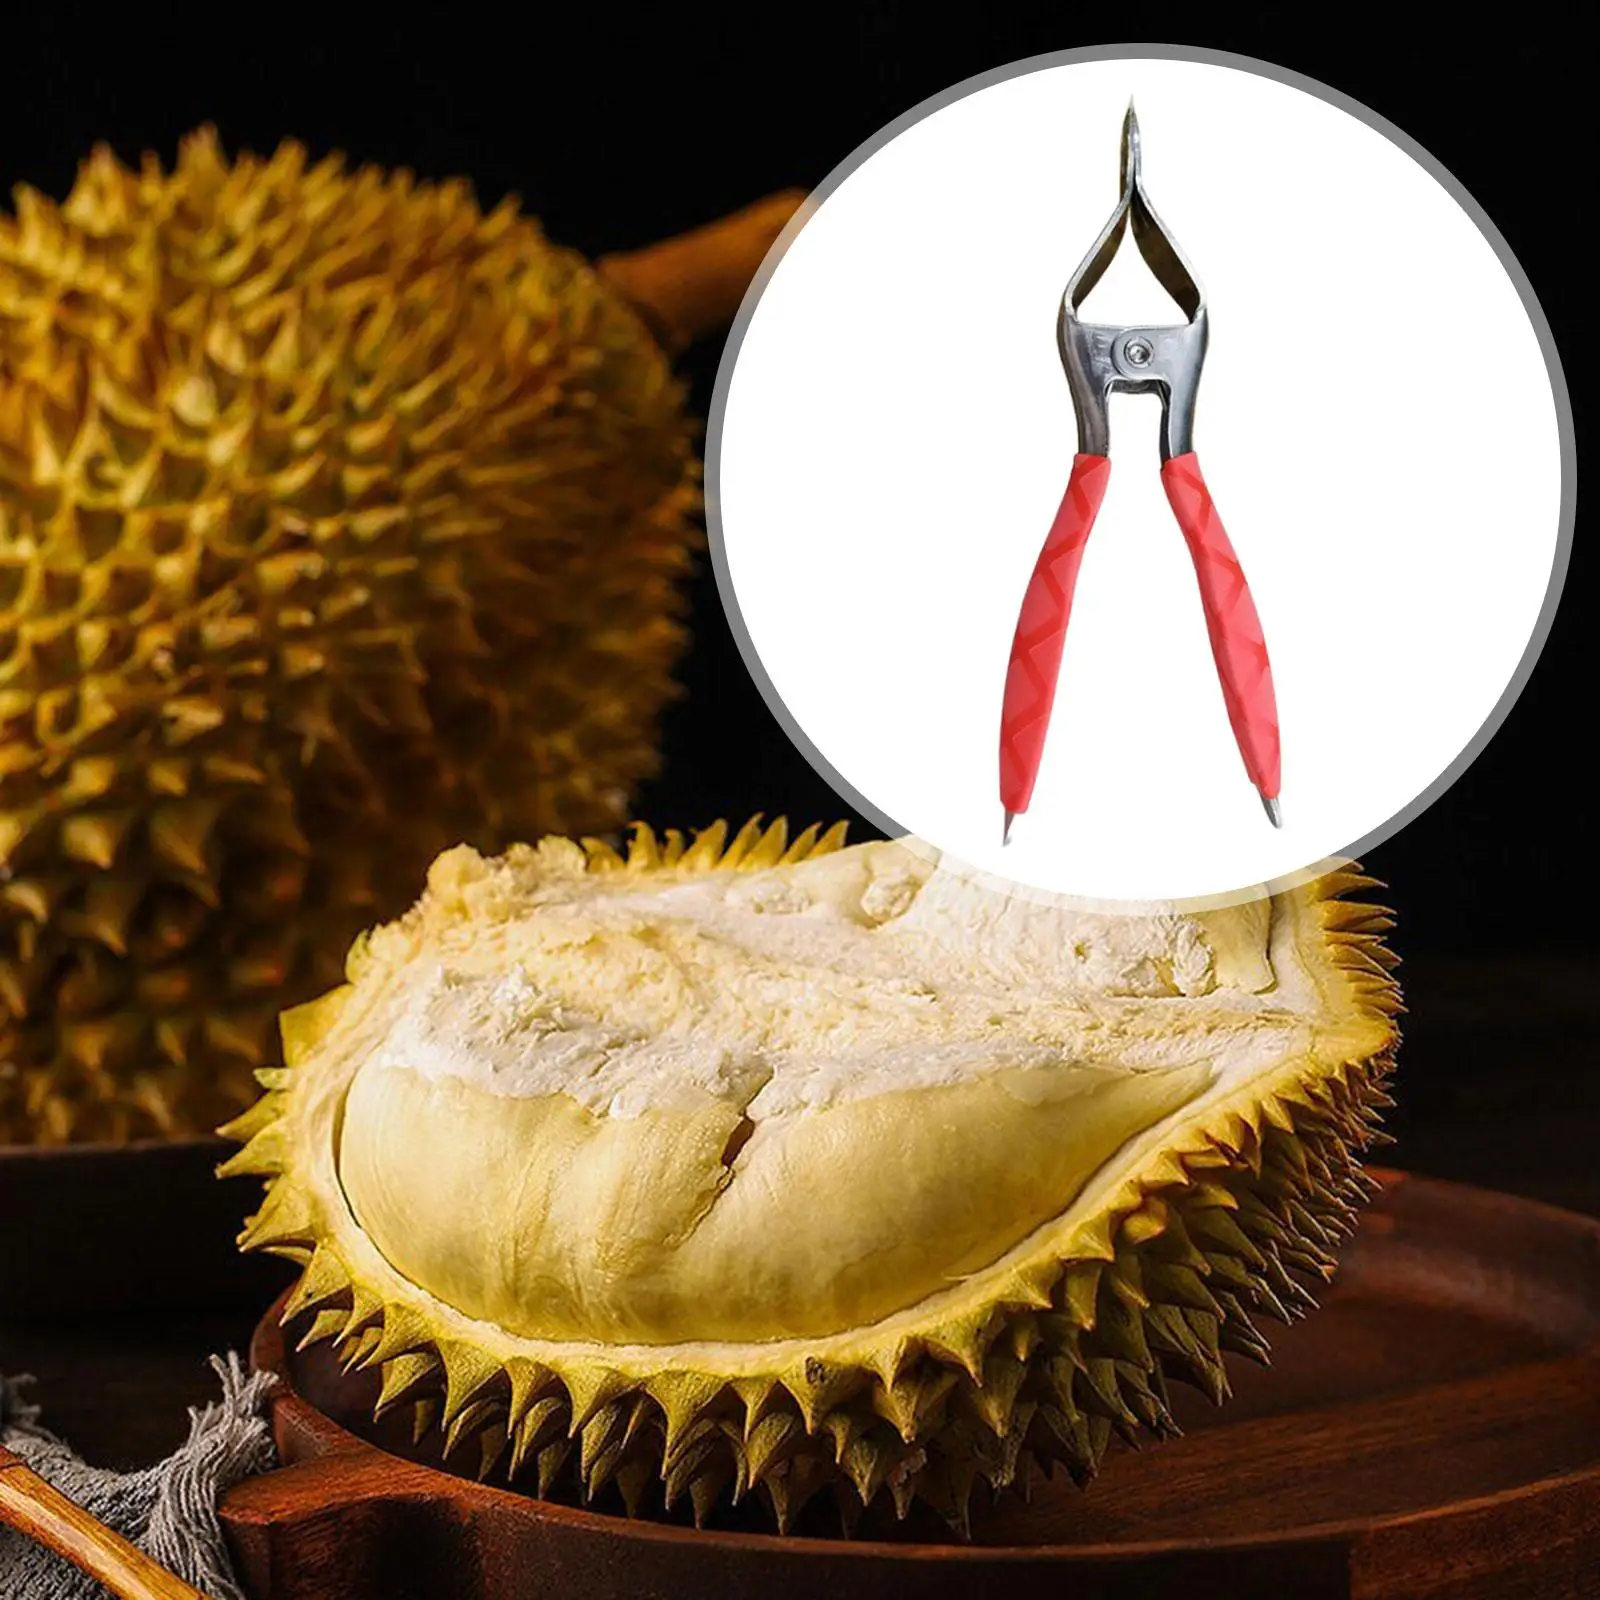 Fruit Sheller Save Labors Practical Durian Opener Durian Peel Break Tool for Camping Cooking Fruits Shop Grocery Household